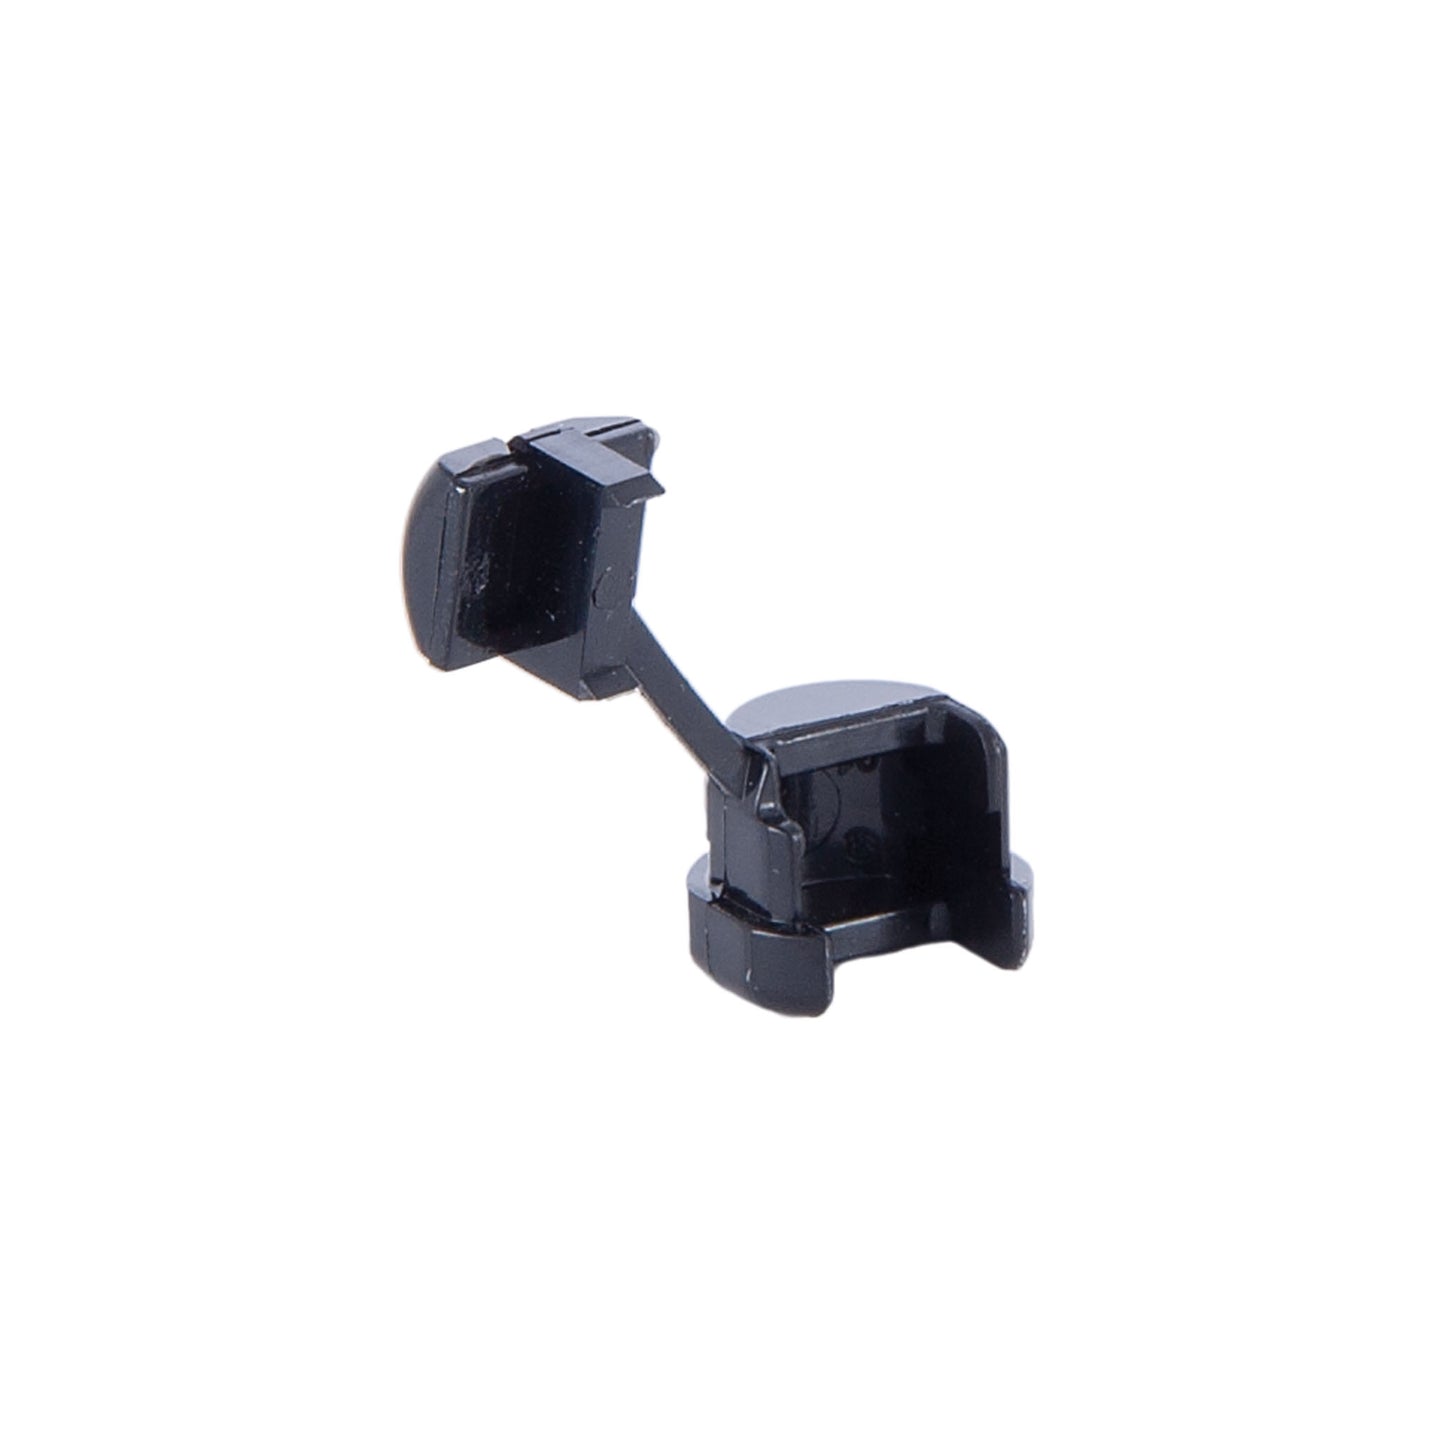 Black or White Color, Heyco Strain Relief Bushings for SPT-2 Lamp Cord (26912)